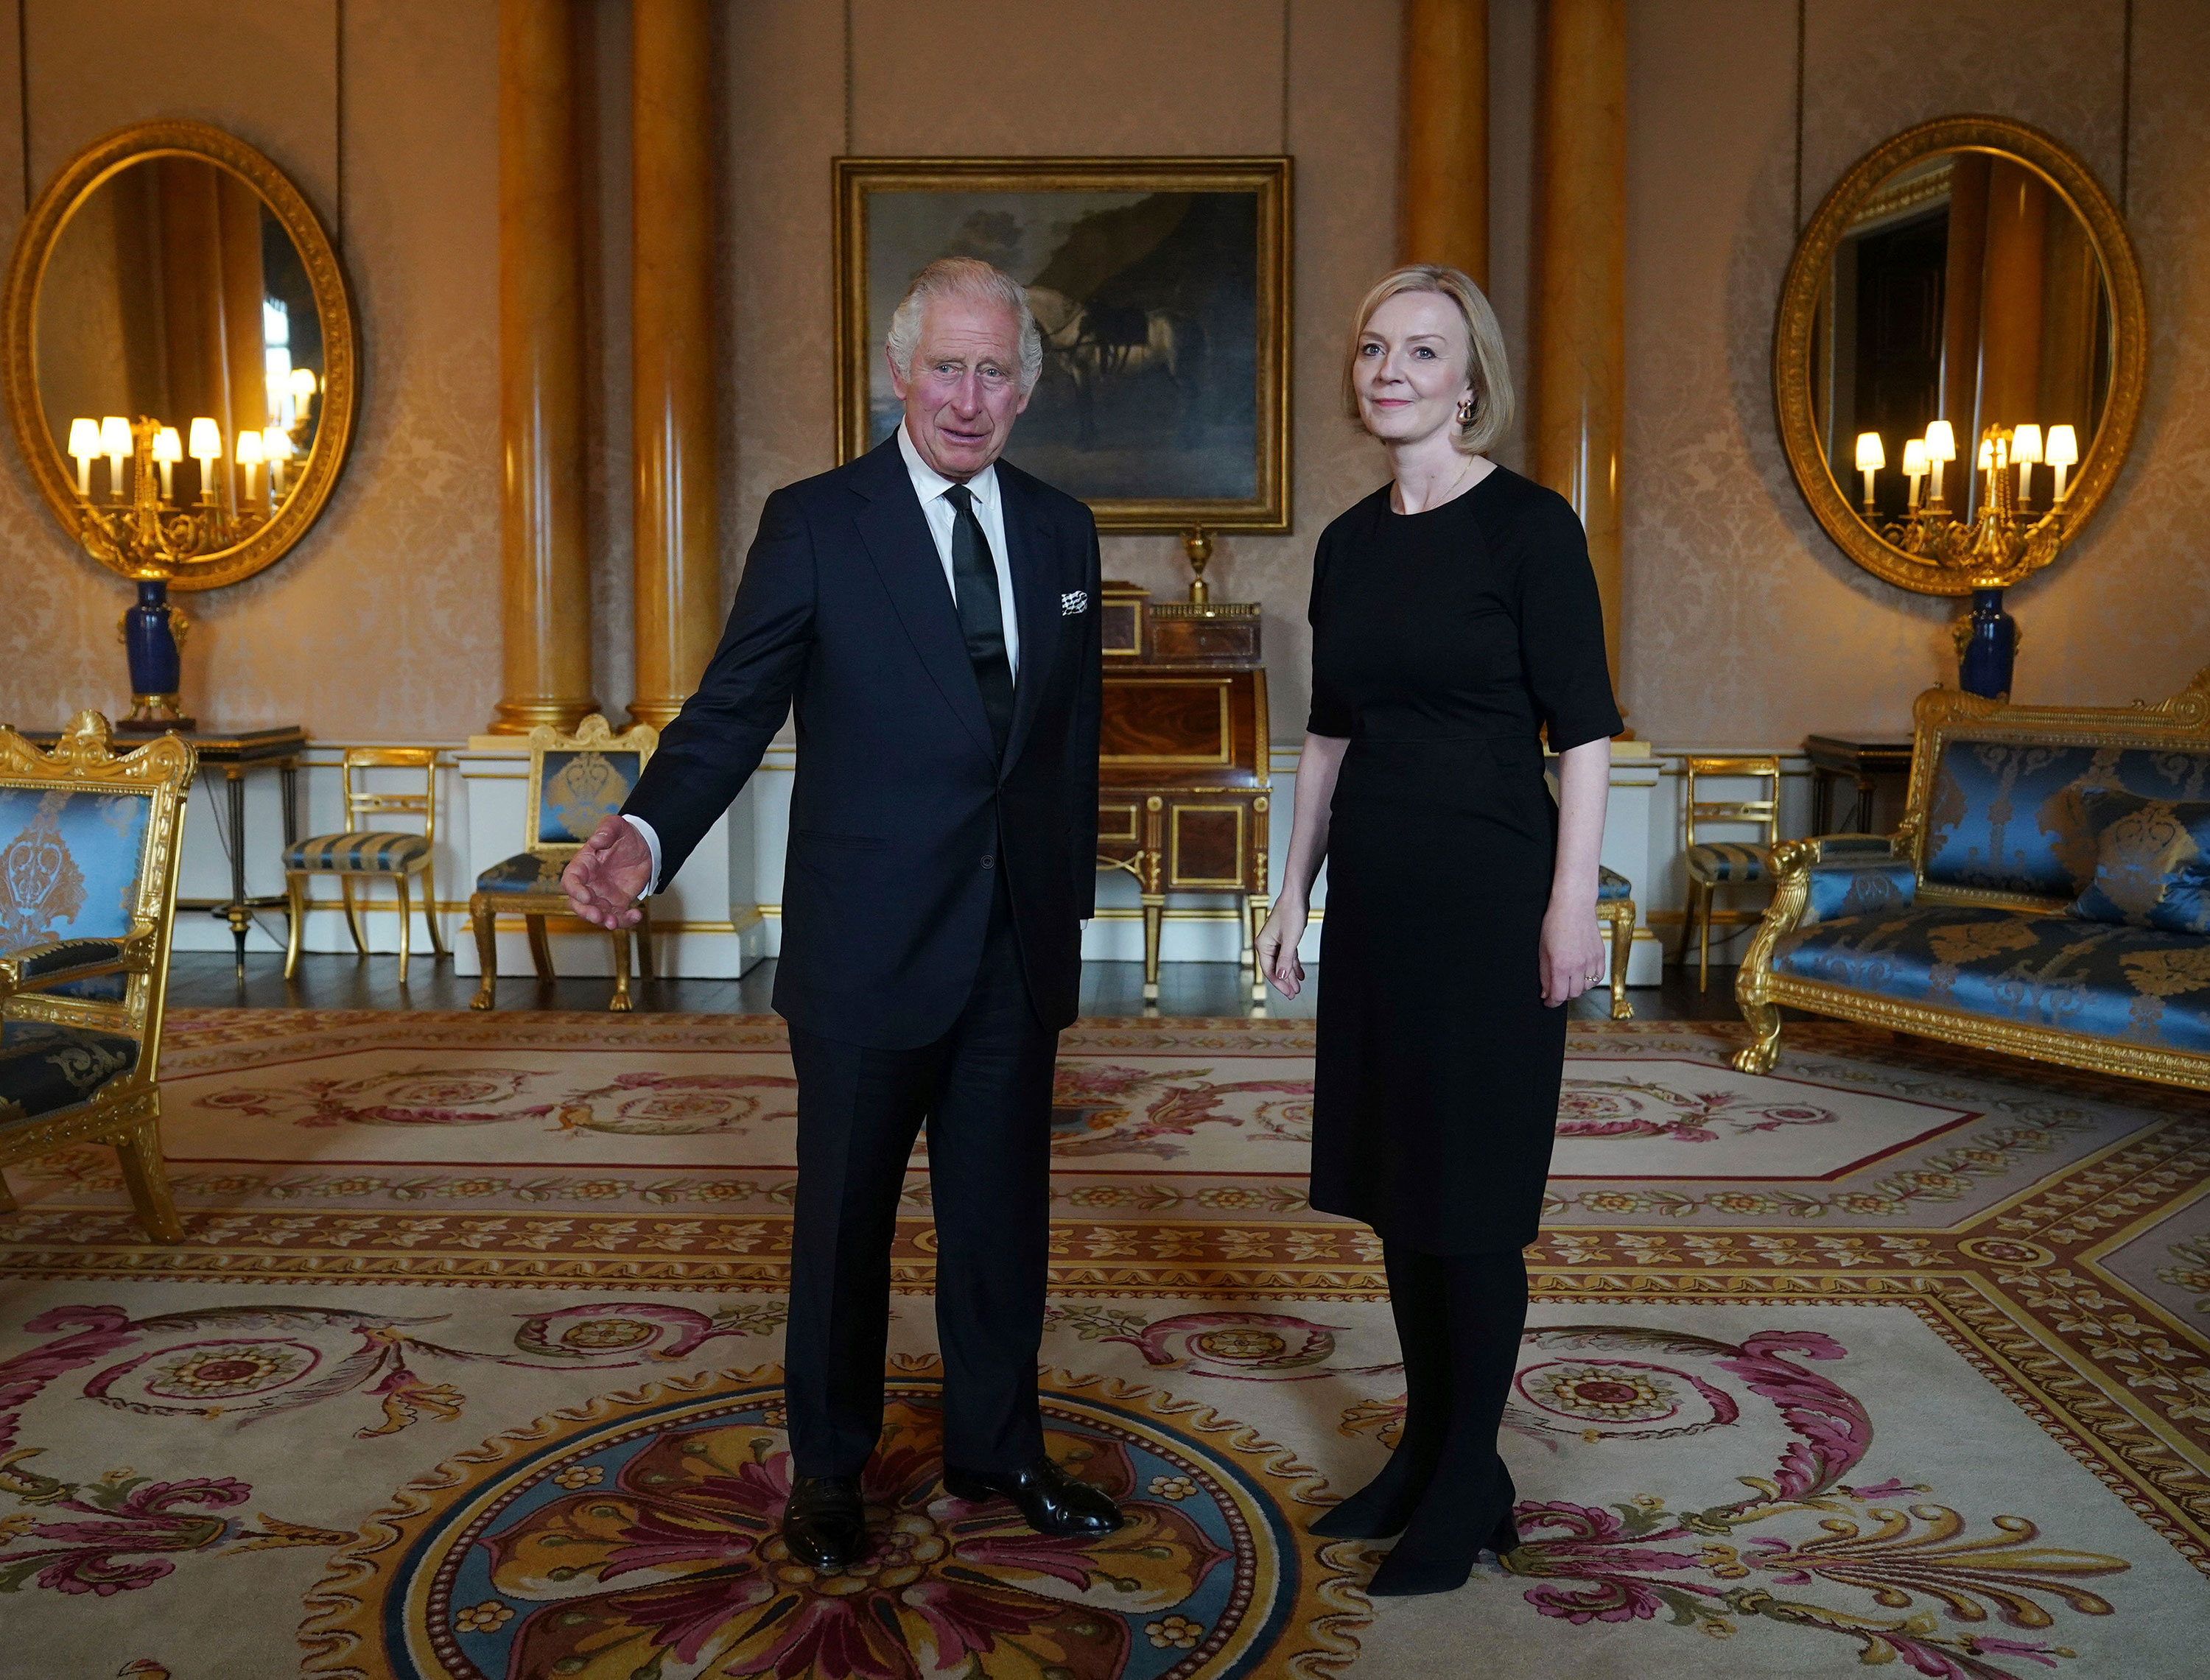 King Charles III speaks with Prime Minister Liz Truss during their first meeting at Buckingham Palace on Friday.